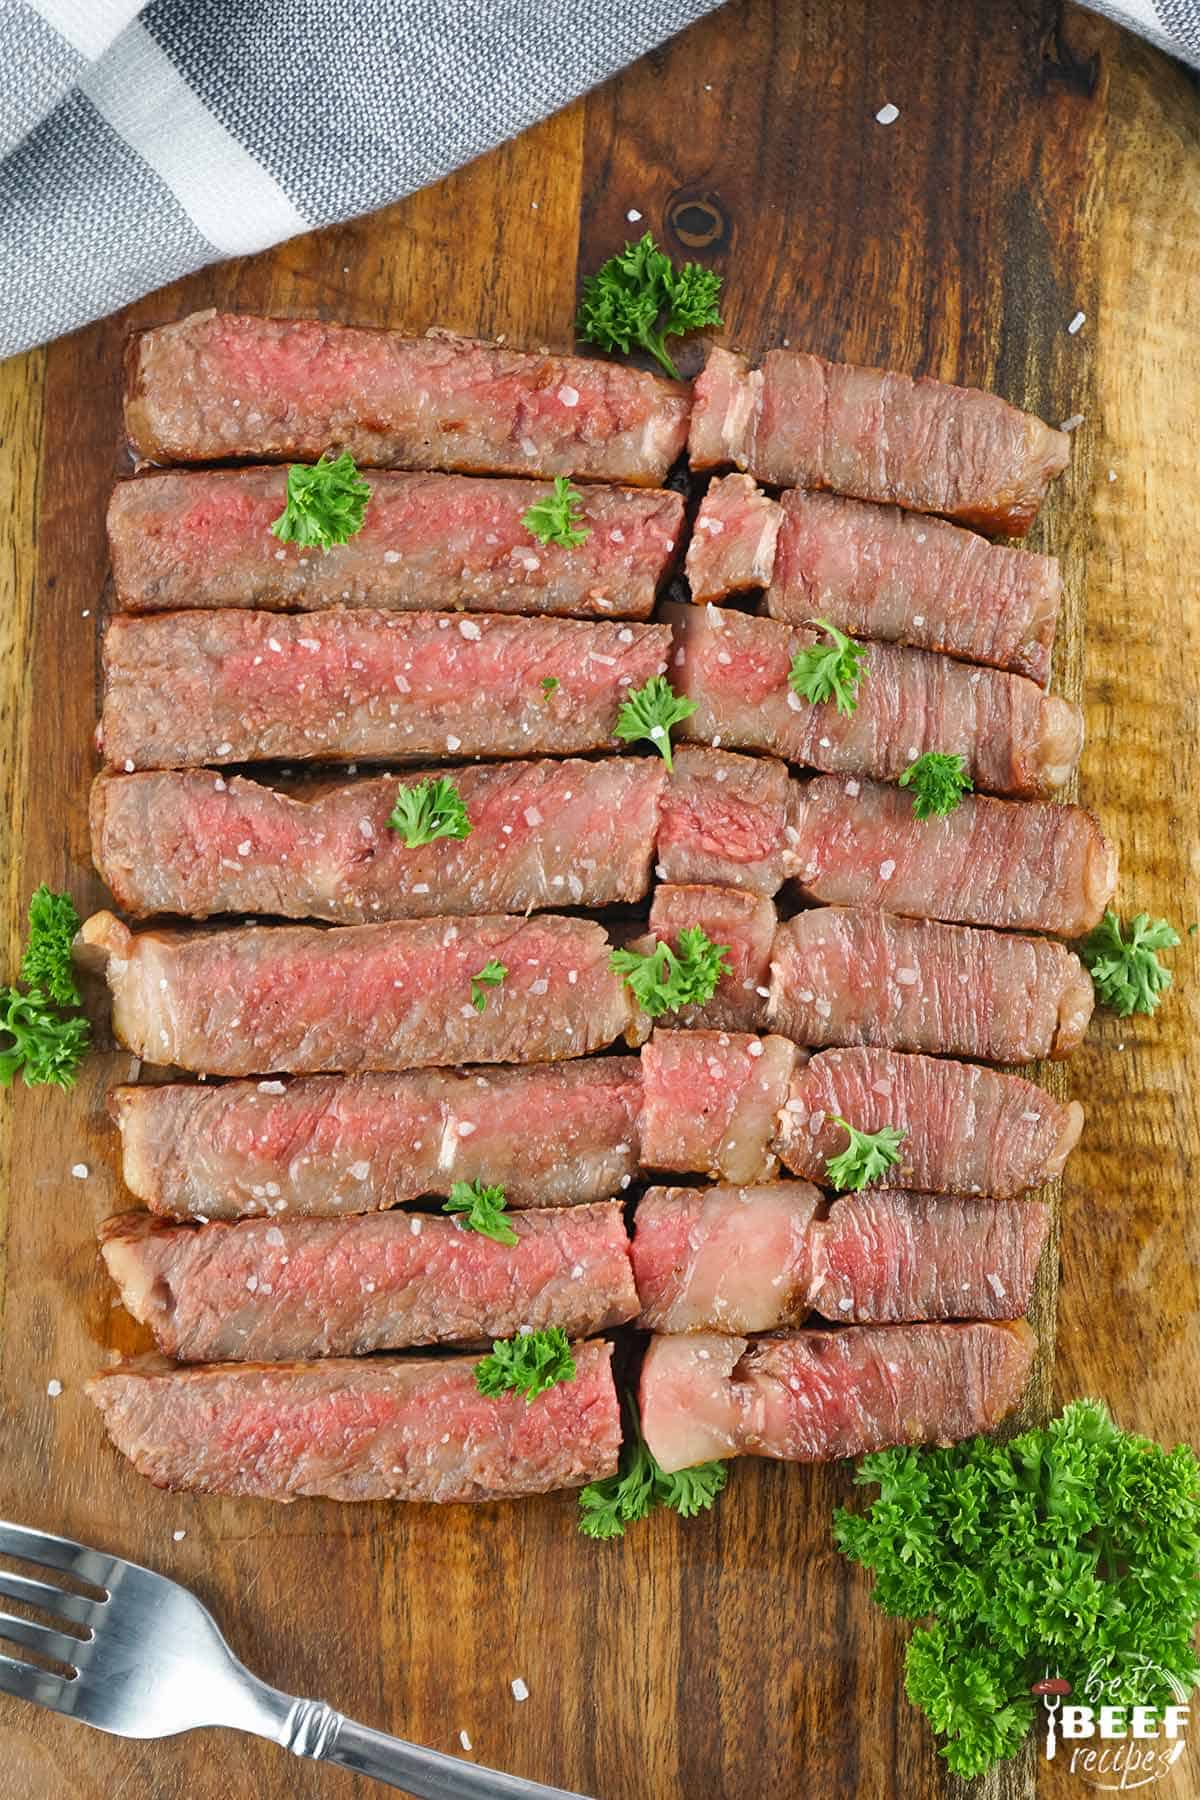 slices of wagyu steak on a serving board